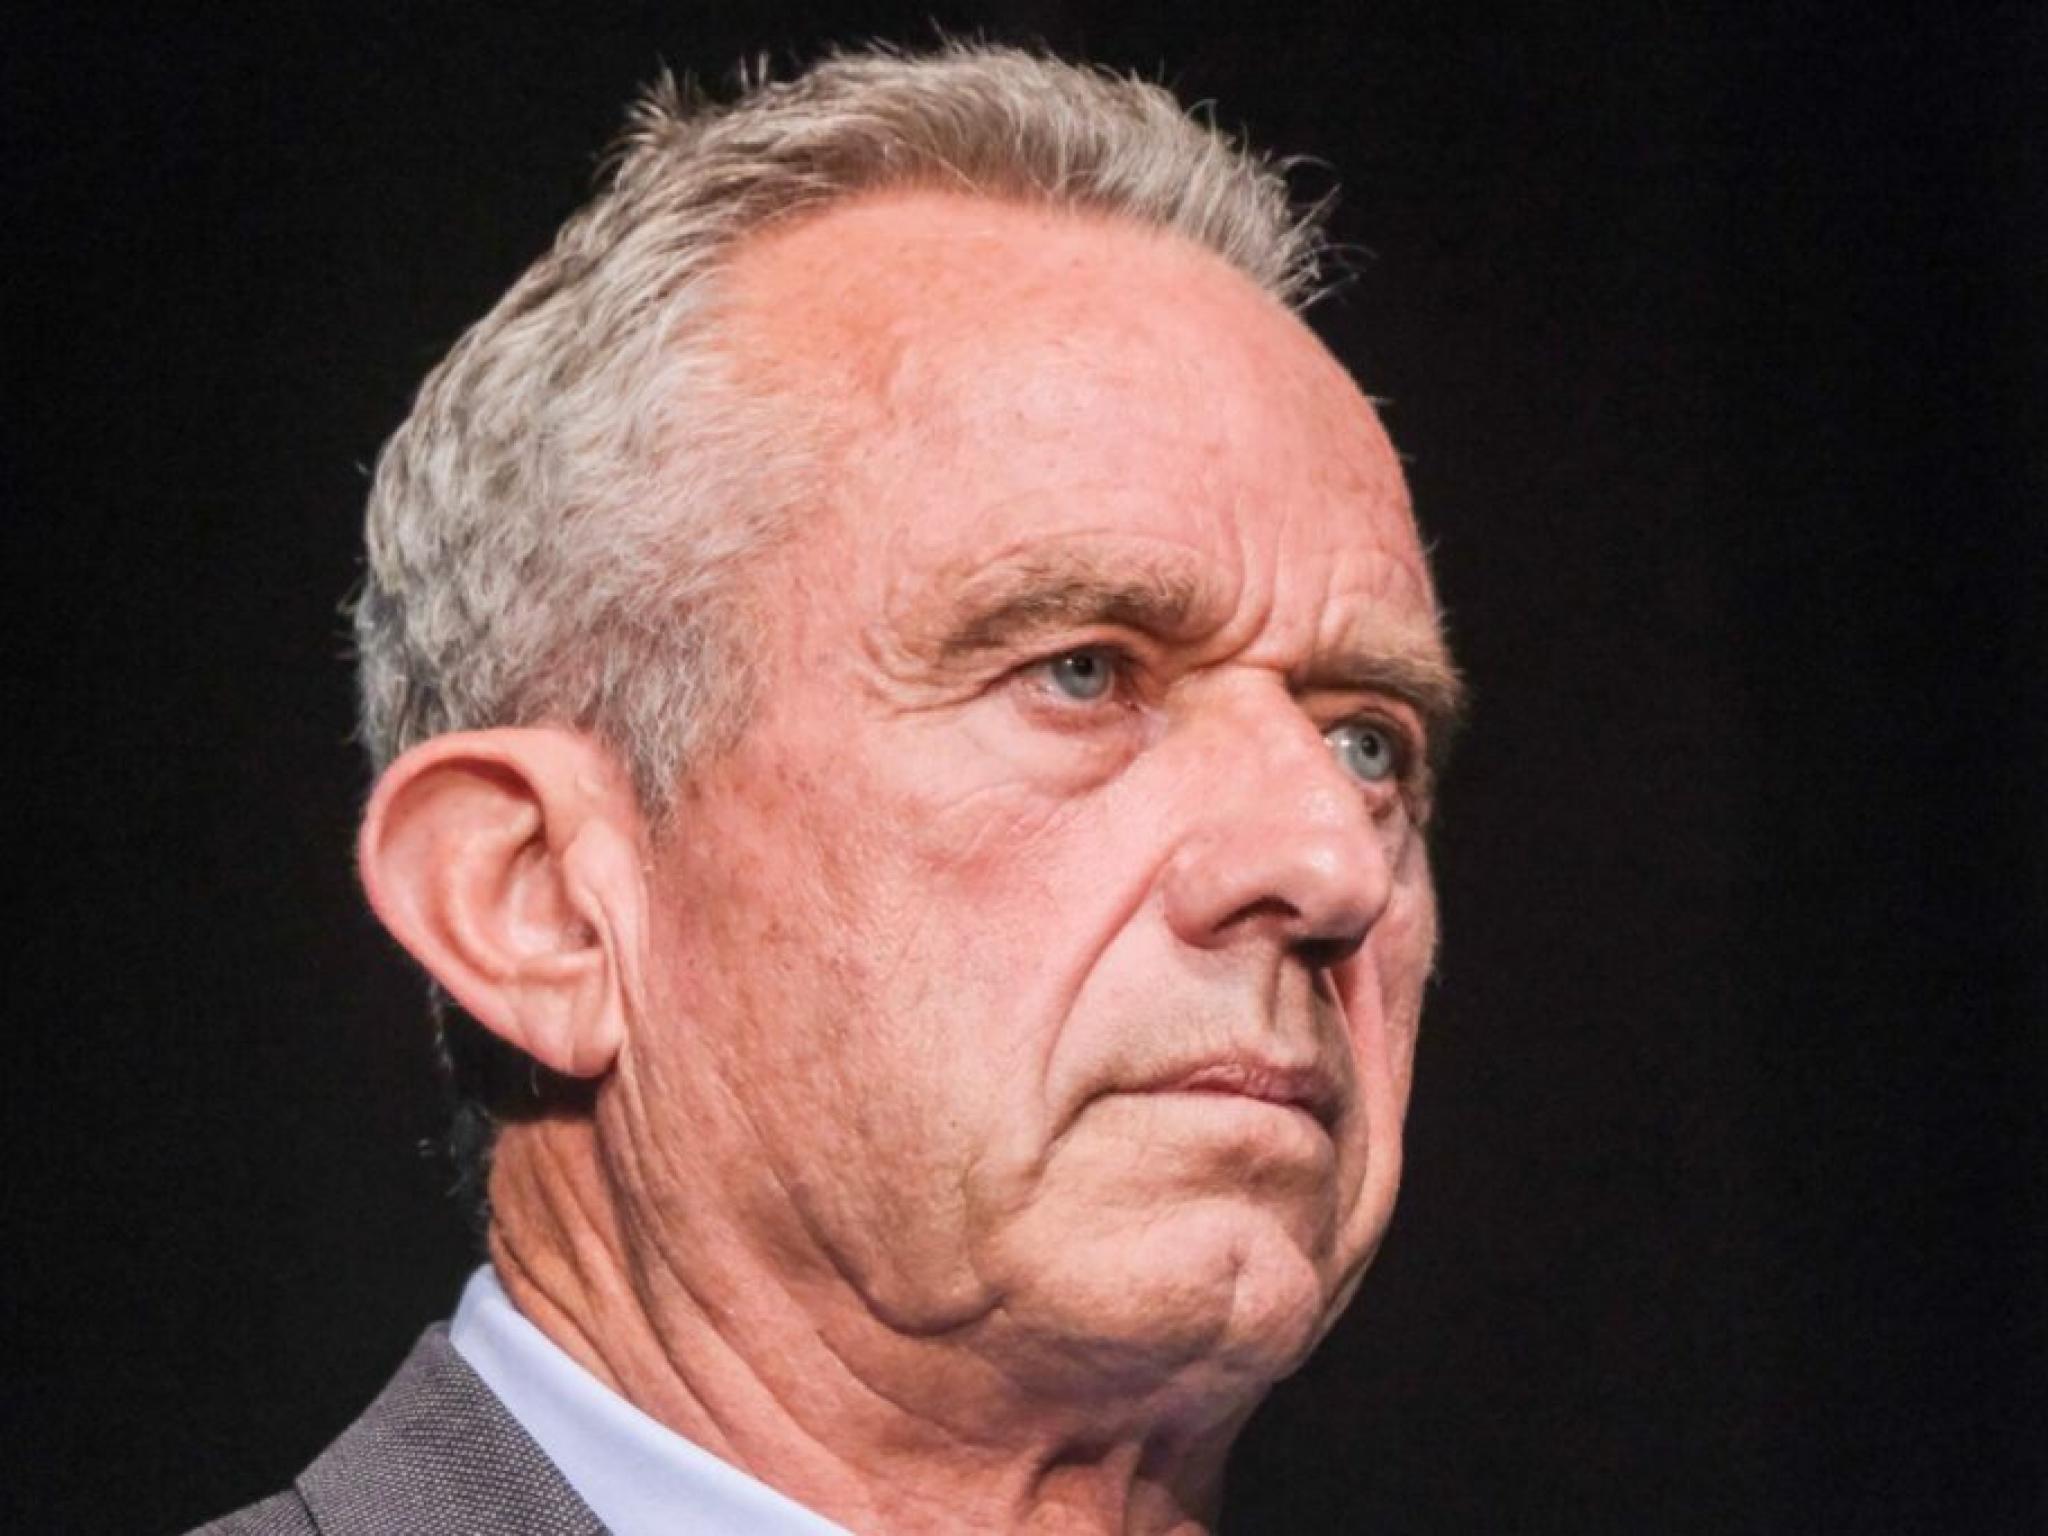  pro-bitcoin-candidate-robert-kennedy-jr-calls-for-monument-honoring-julian-assange-in-washington-freedom-for-edward-snowden-and-silk-road-fame-ross-ulbricht 